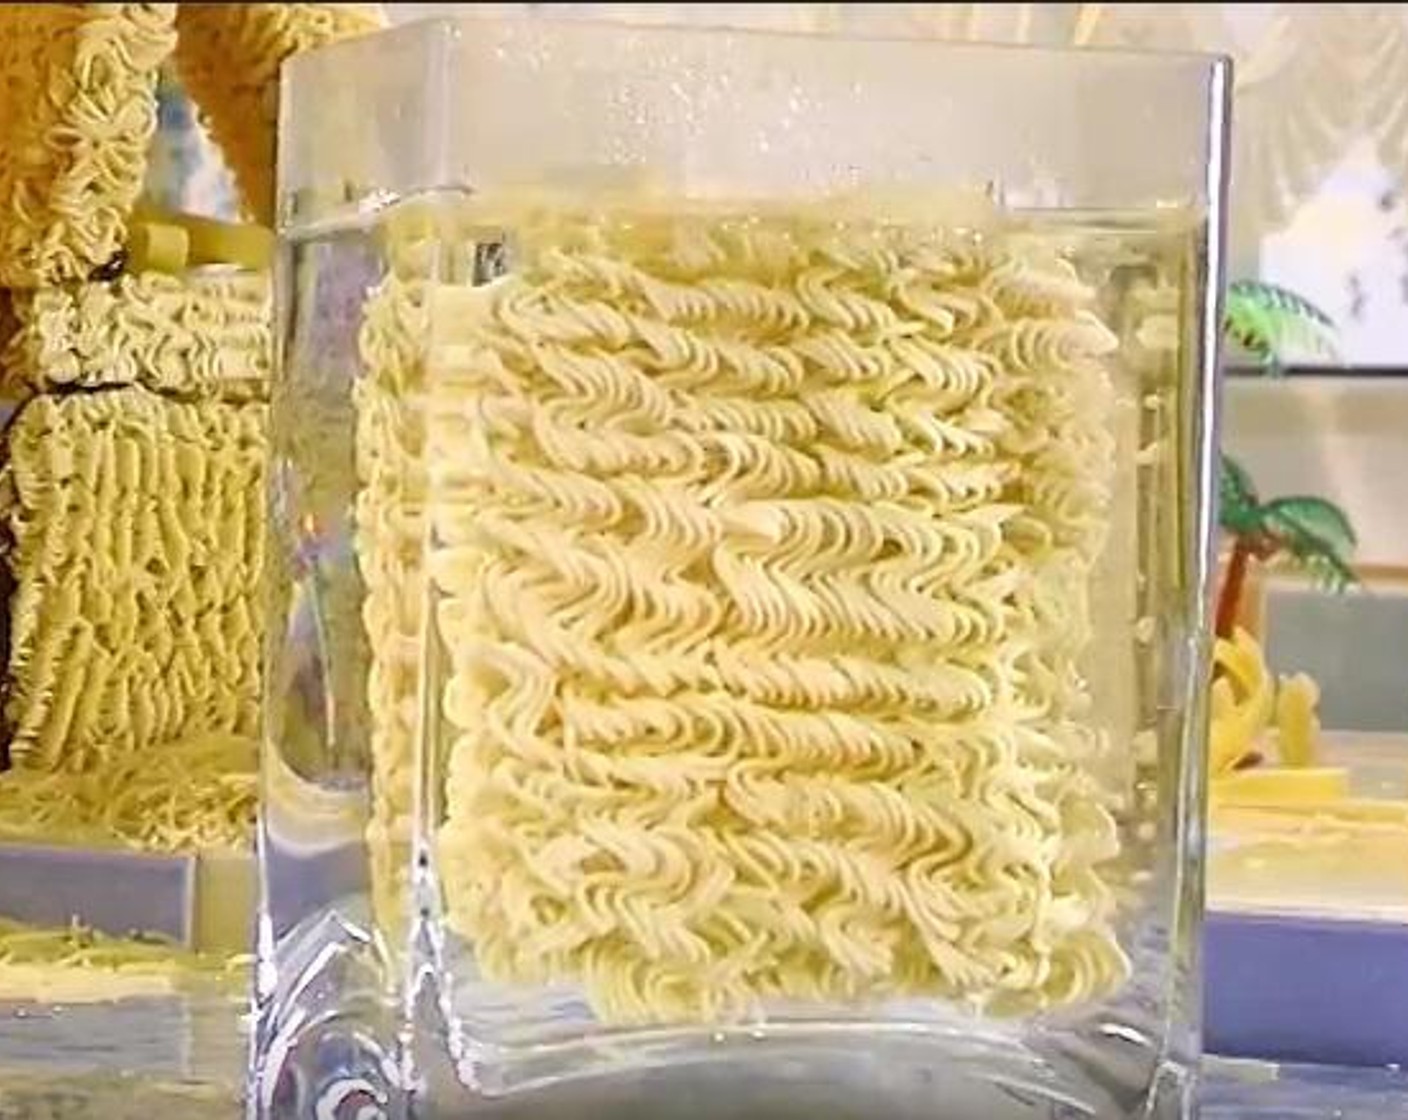 step 1 Take the Instant Noodles (3.5 oz) and put it inside a container with water, until it is well softened. When done, rinse the noodle using a pasta rinser.